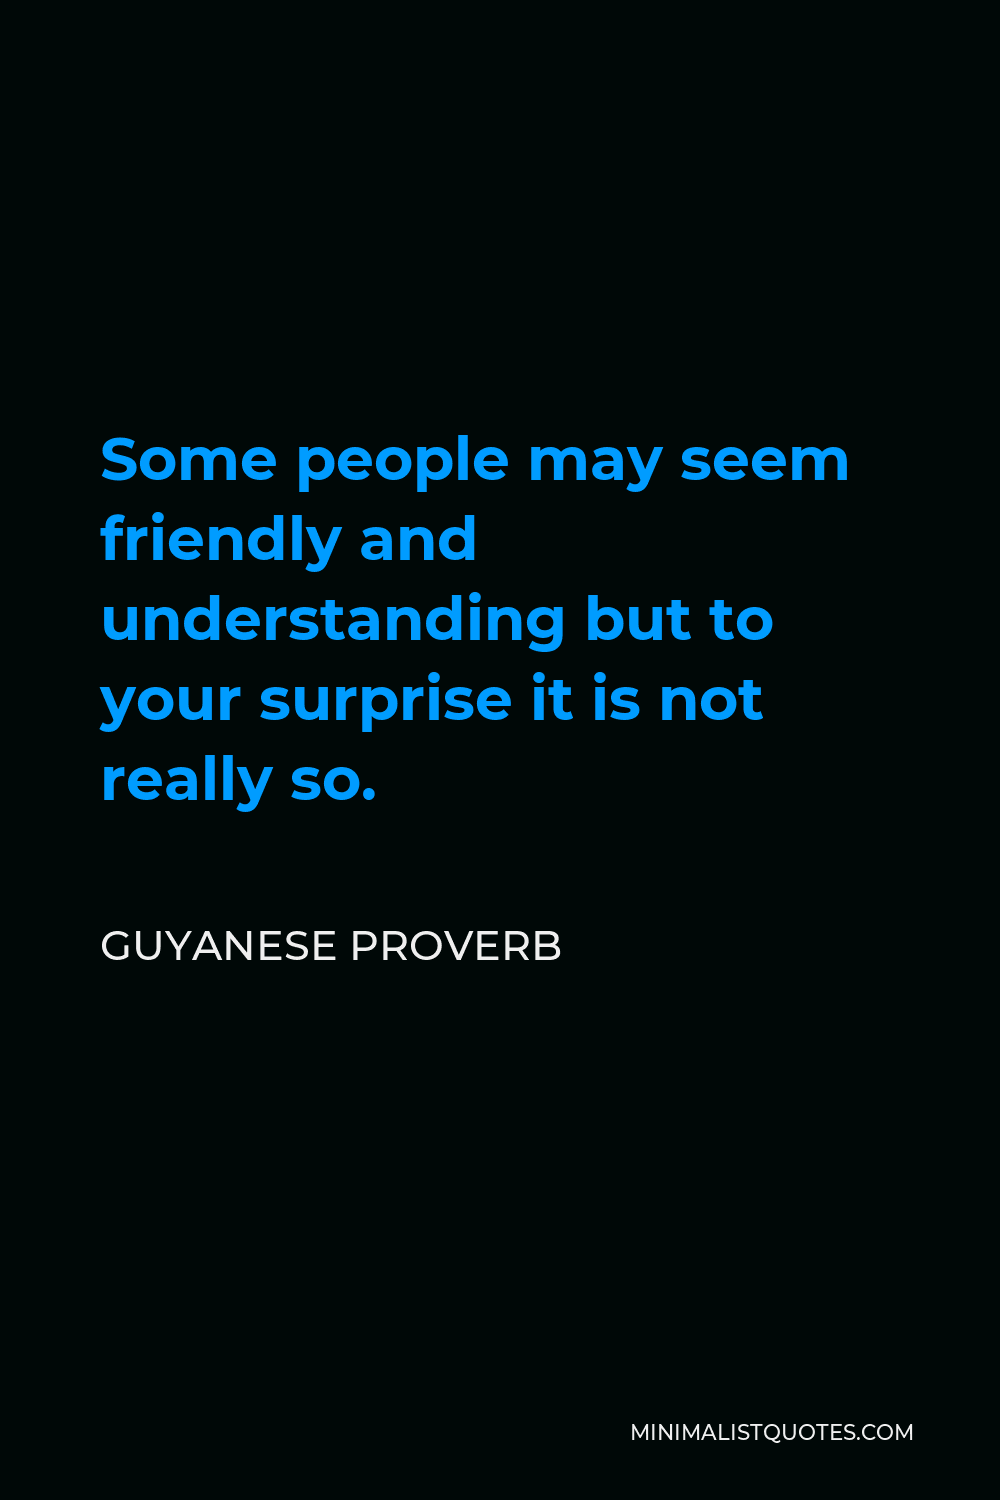 Guyanese Proverb Quote - Some people may seem friendly and understanding but to your surprise it is not really so.